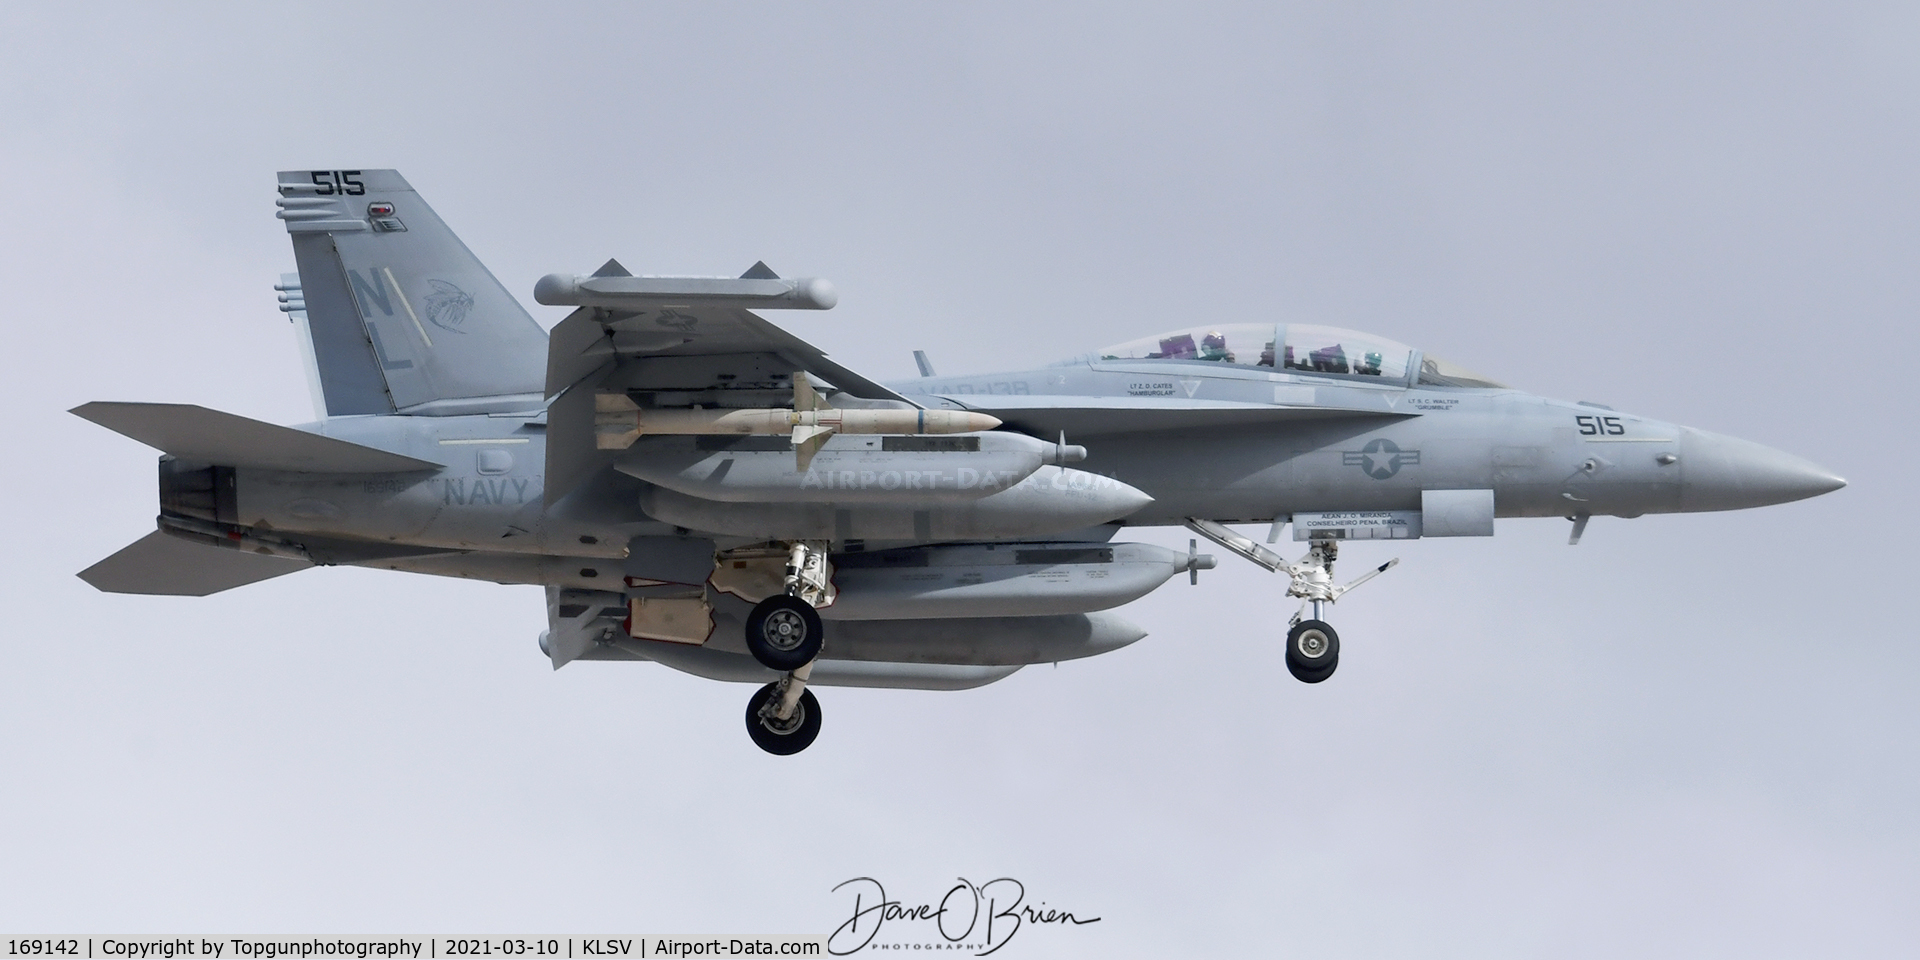 169142, Boeing EA-18G Growler C/N G133, VAQ138 out of NAS Whidbey Island landing at Nellis after a Red Flag sortie